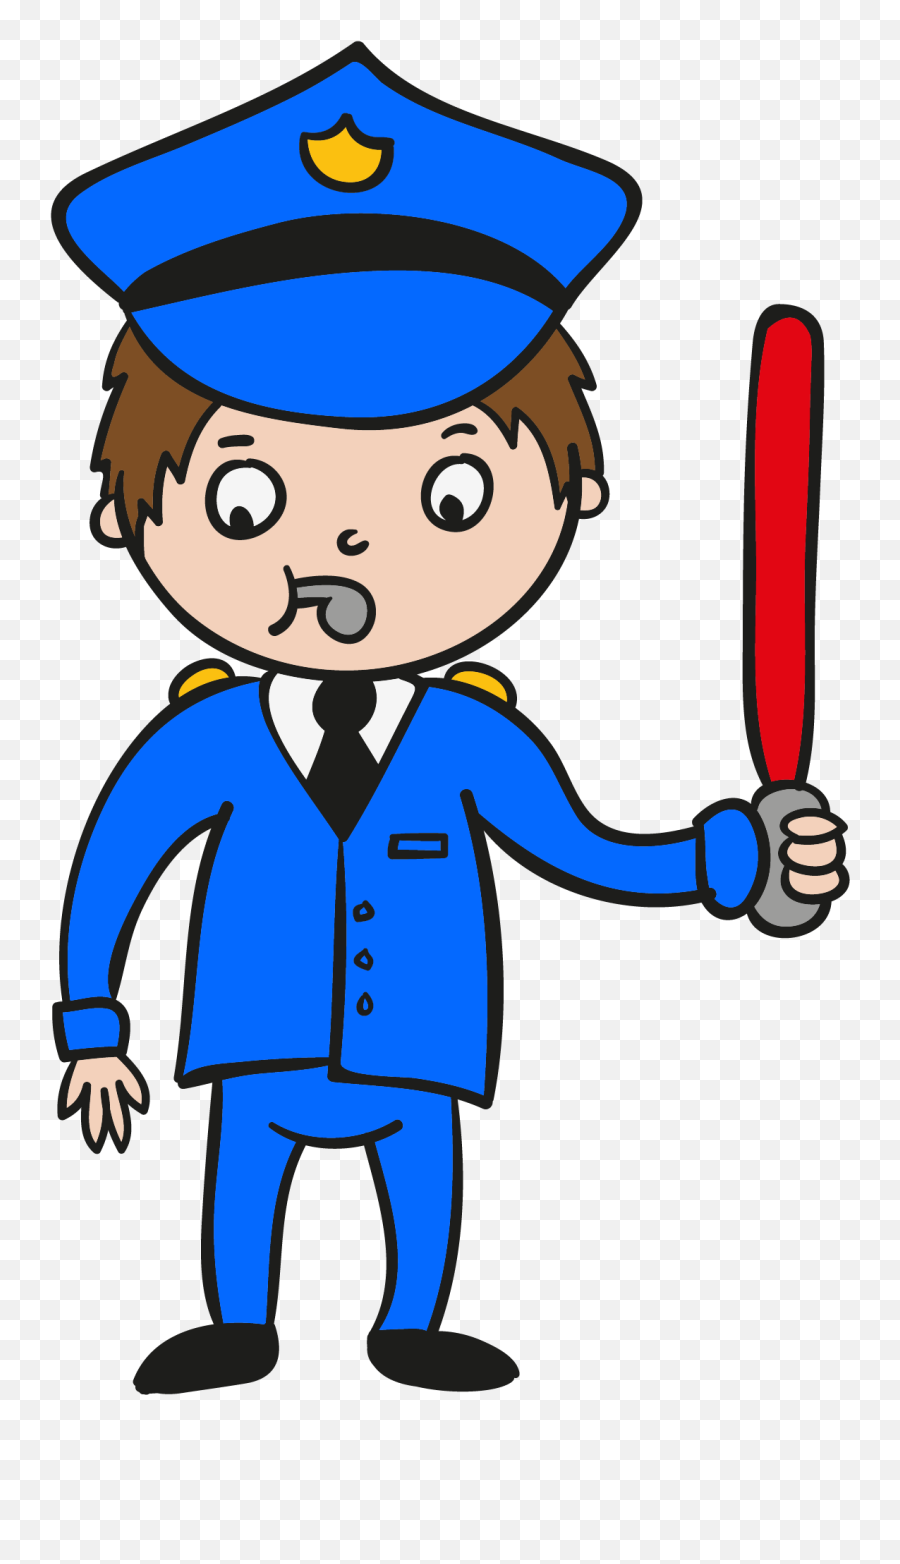 Cop Clipart Police Officer Cop Police - Police Officer Cartoon Line Emoji,Police Officer Clipart